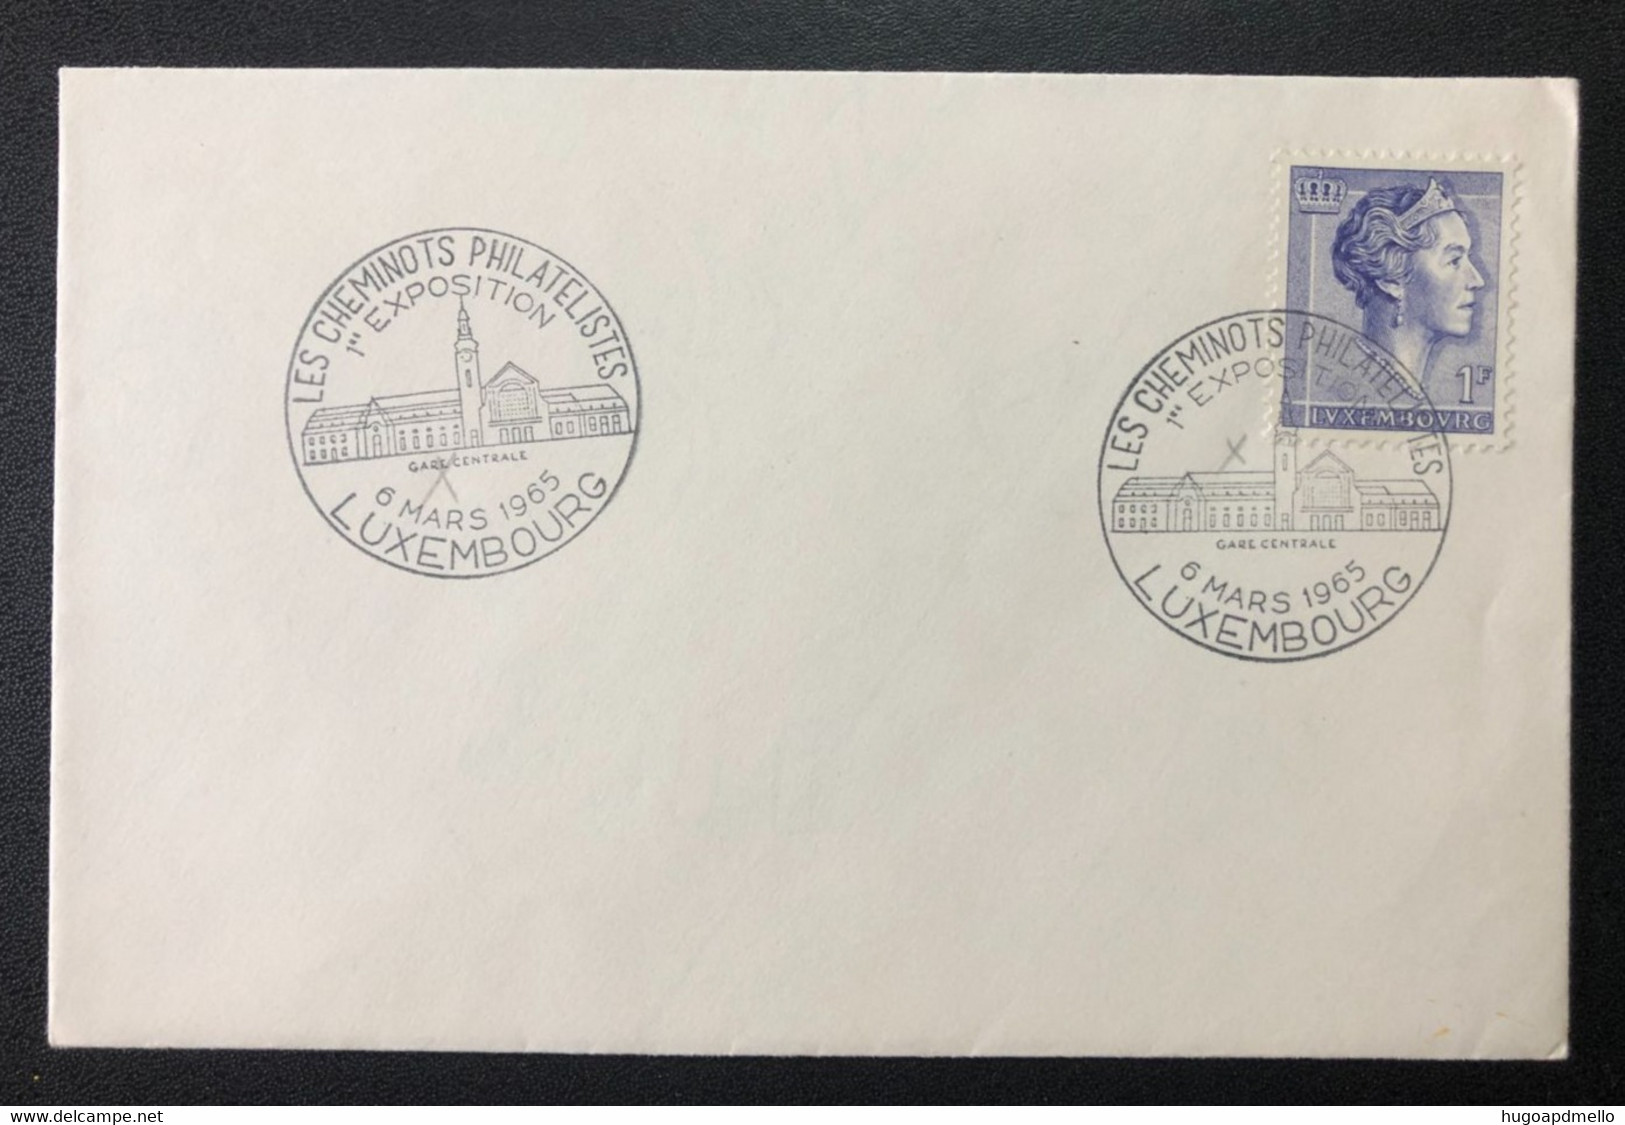 LUXEMBOURG, «1ère Exposition Les Cheminots Philatelistes »,  With Special Postmark, 1965 - Briefe U. Dokumente